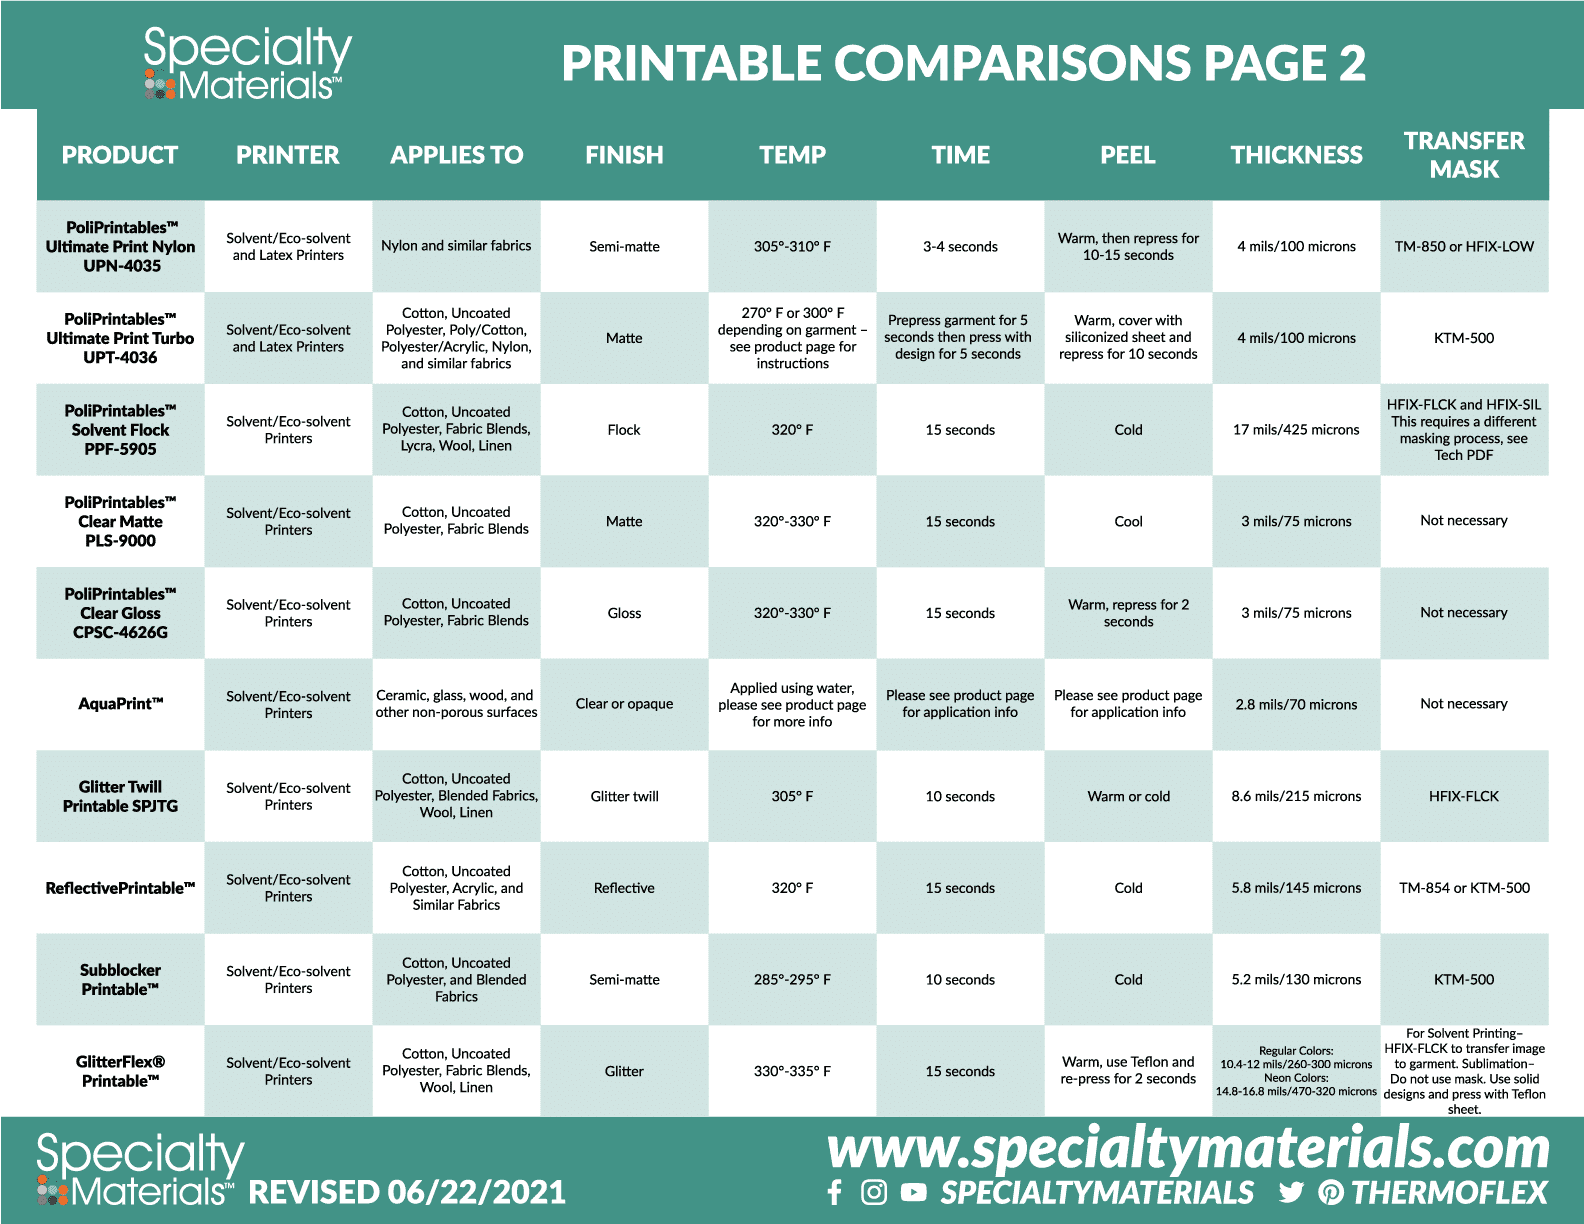 A printable image of the above printable comparison information, the second page